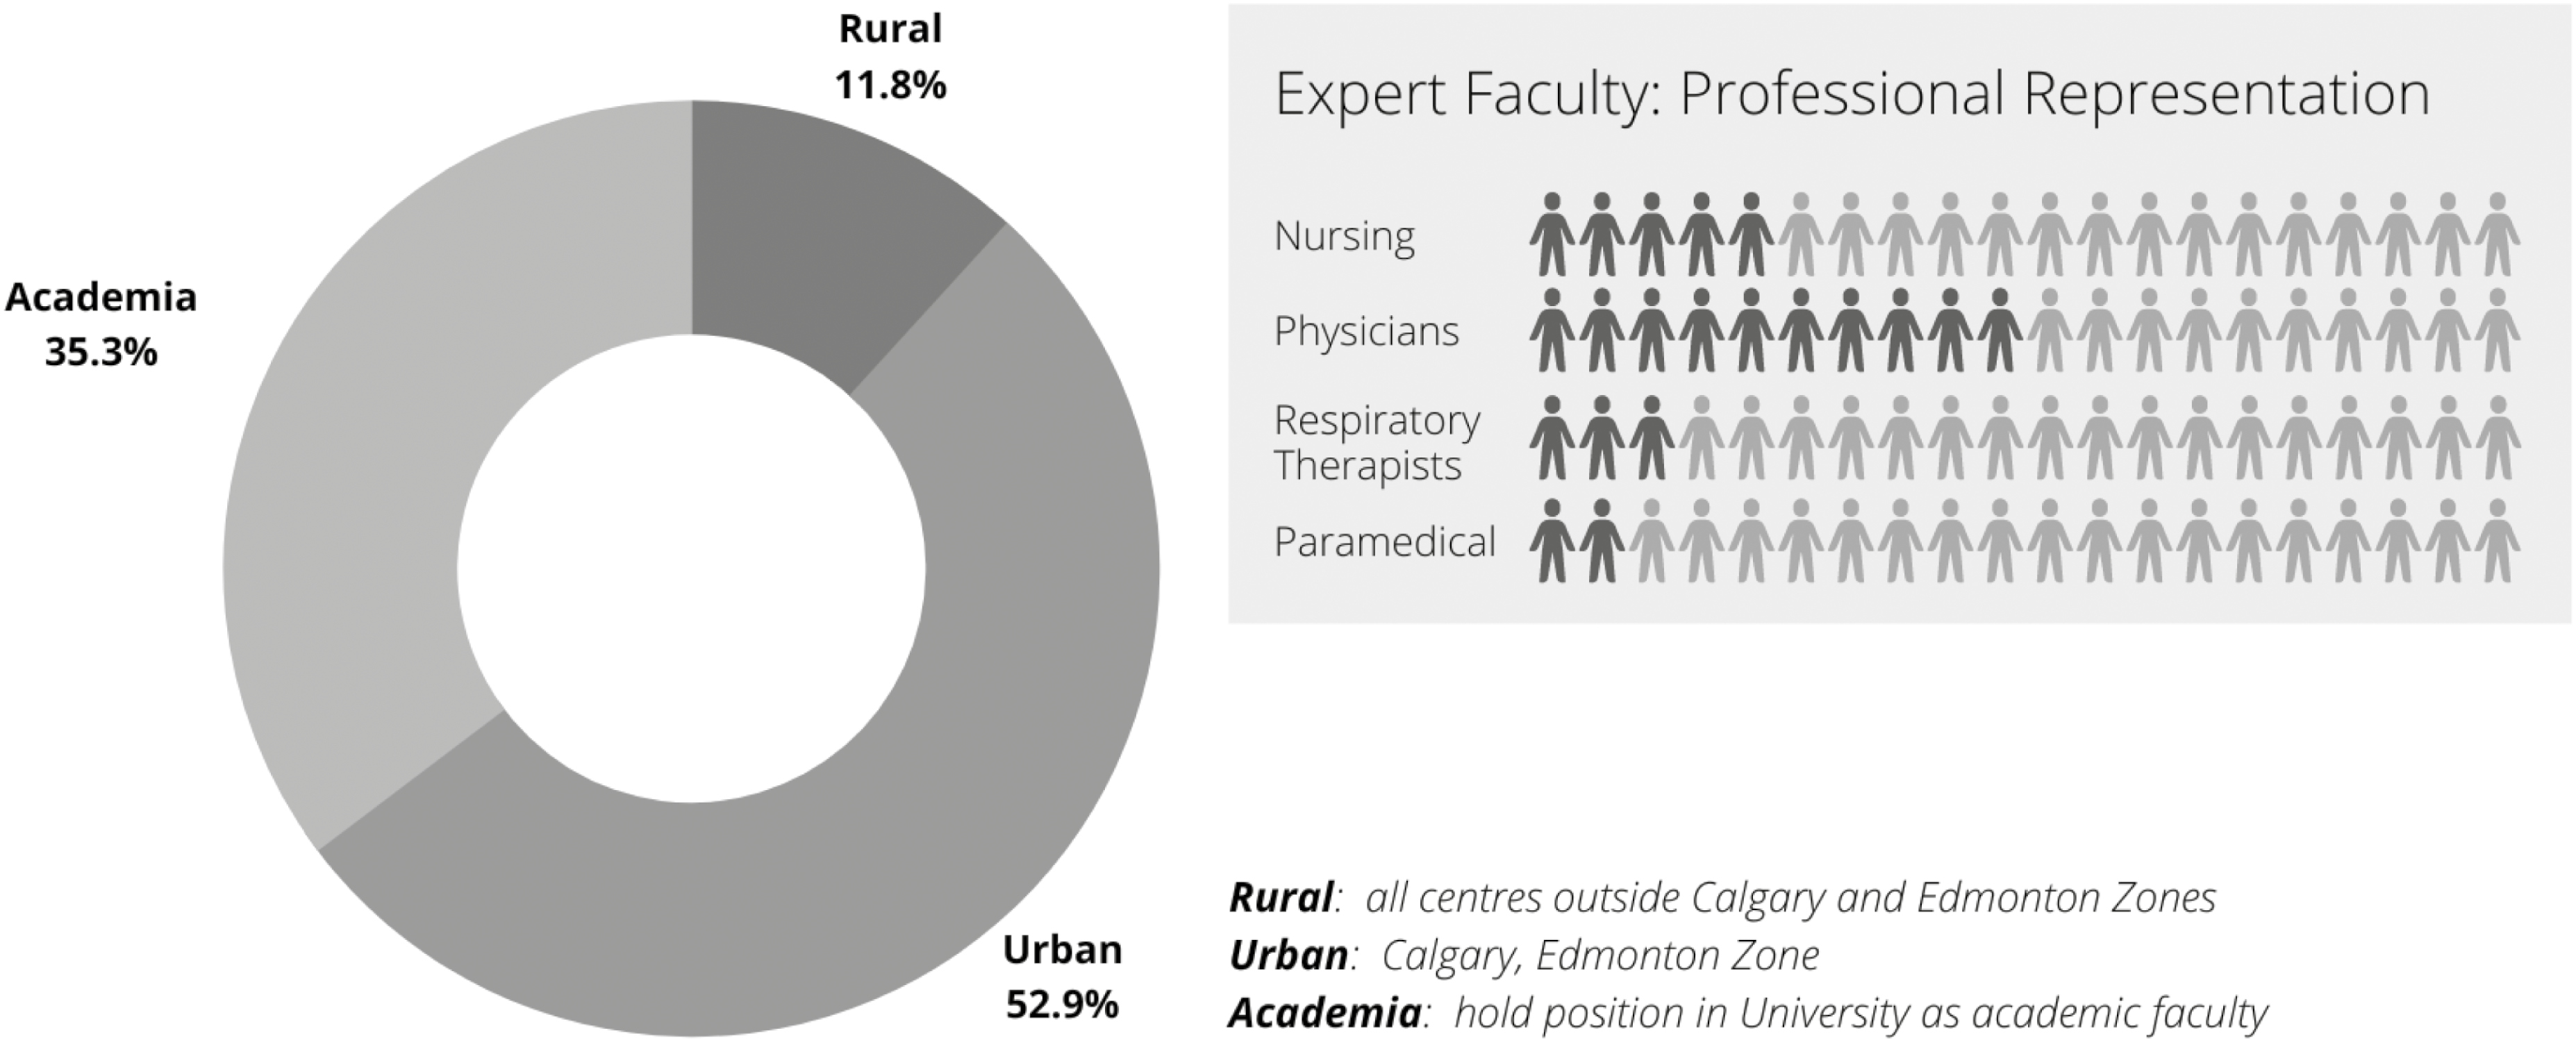 Expert faculty representation by professional experience domains.